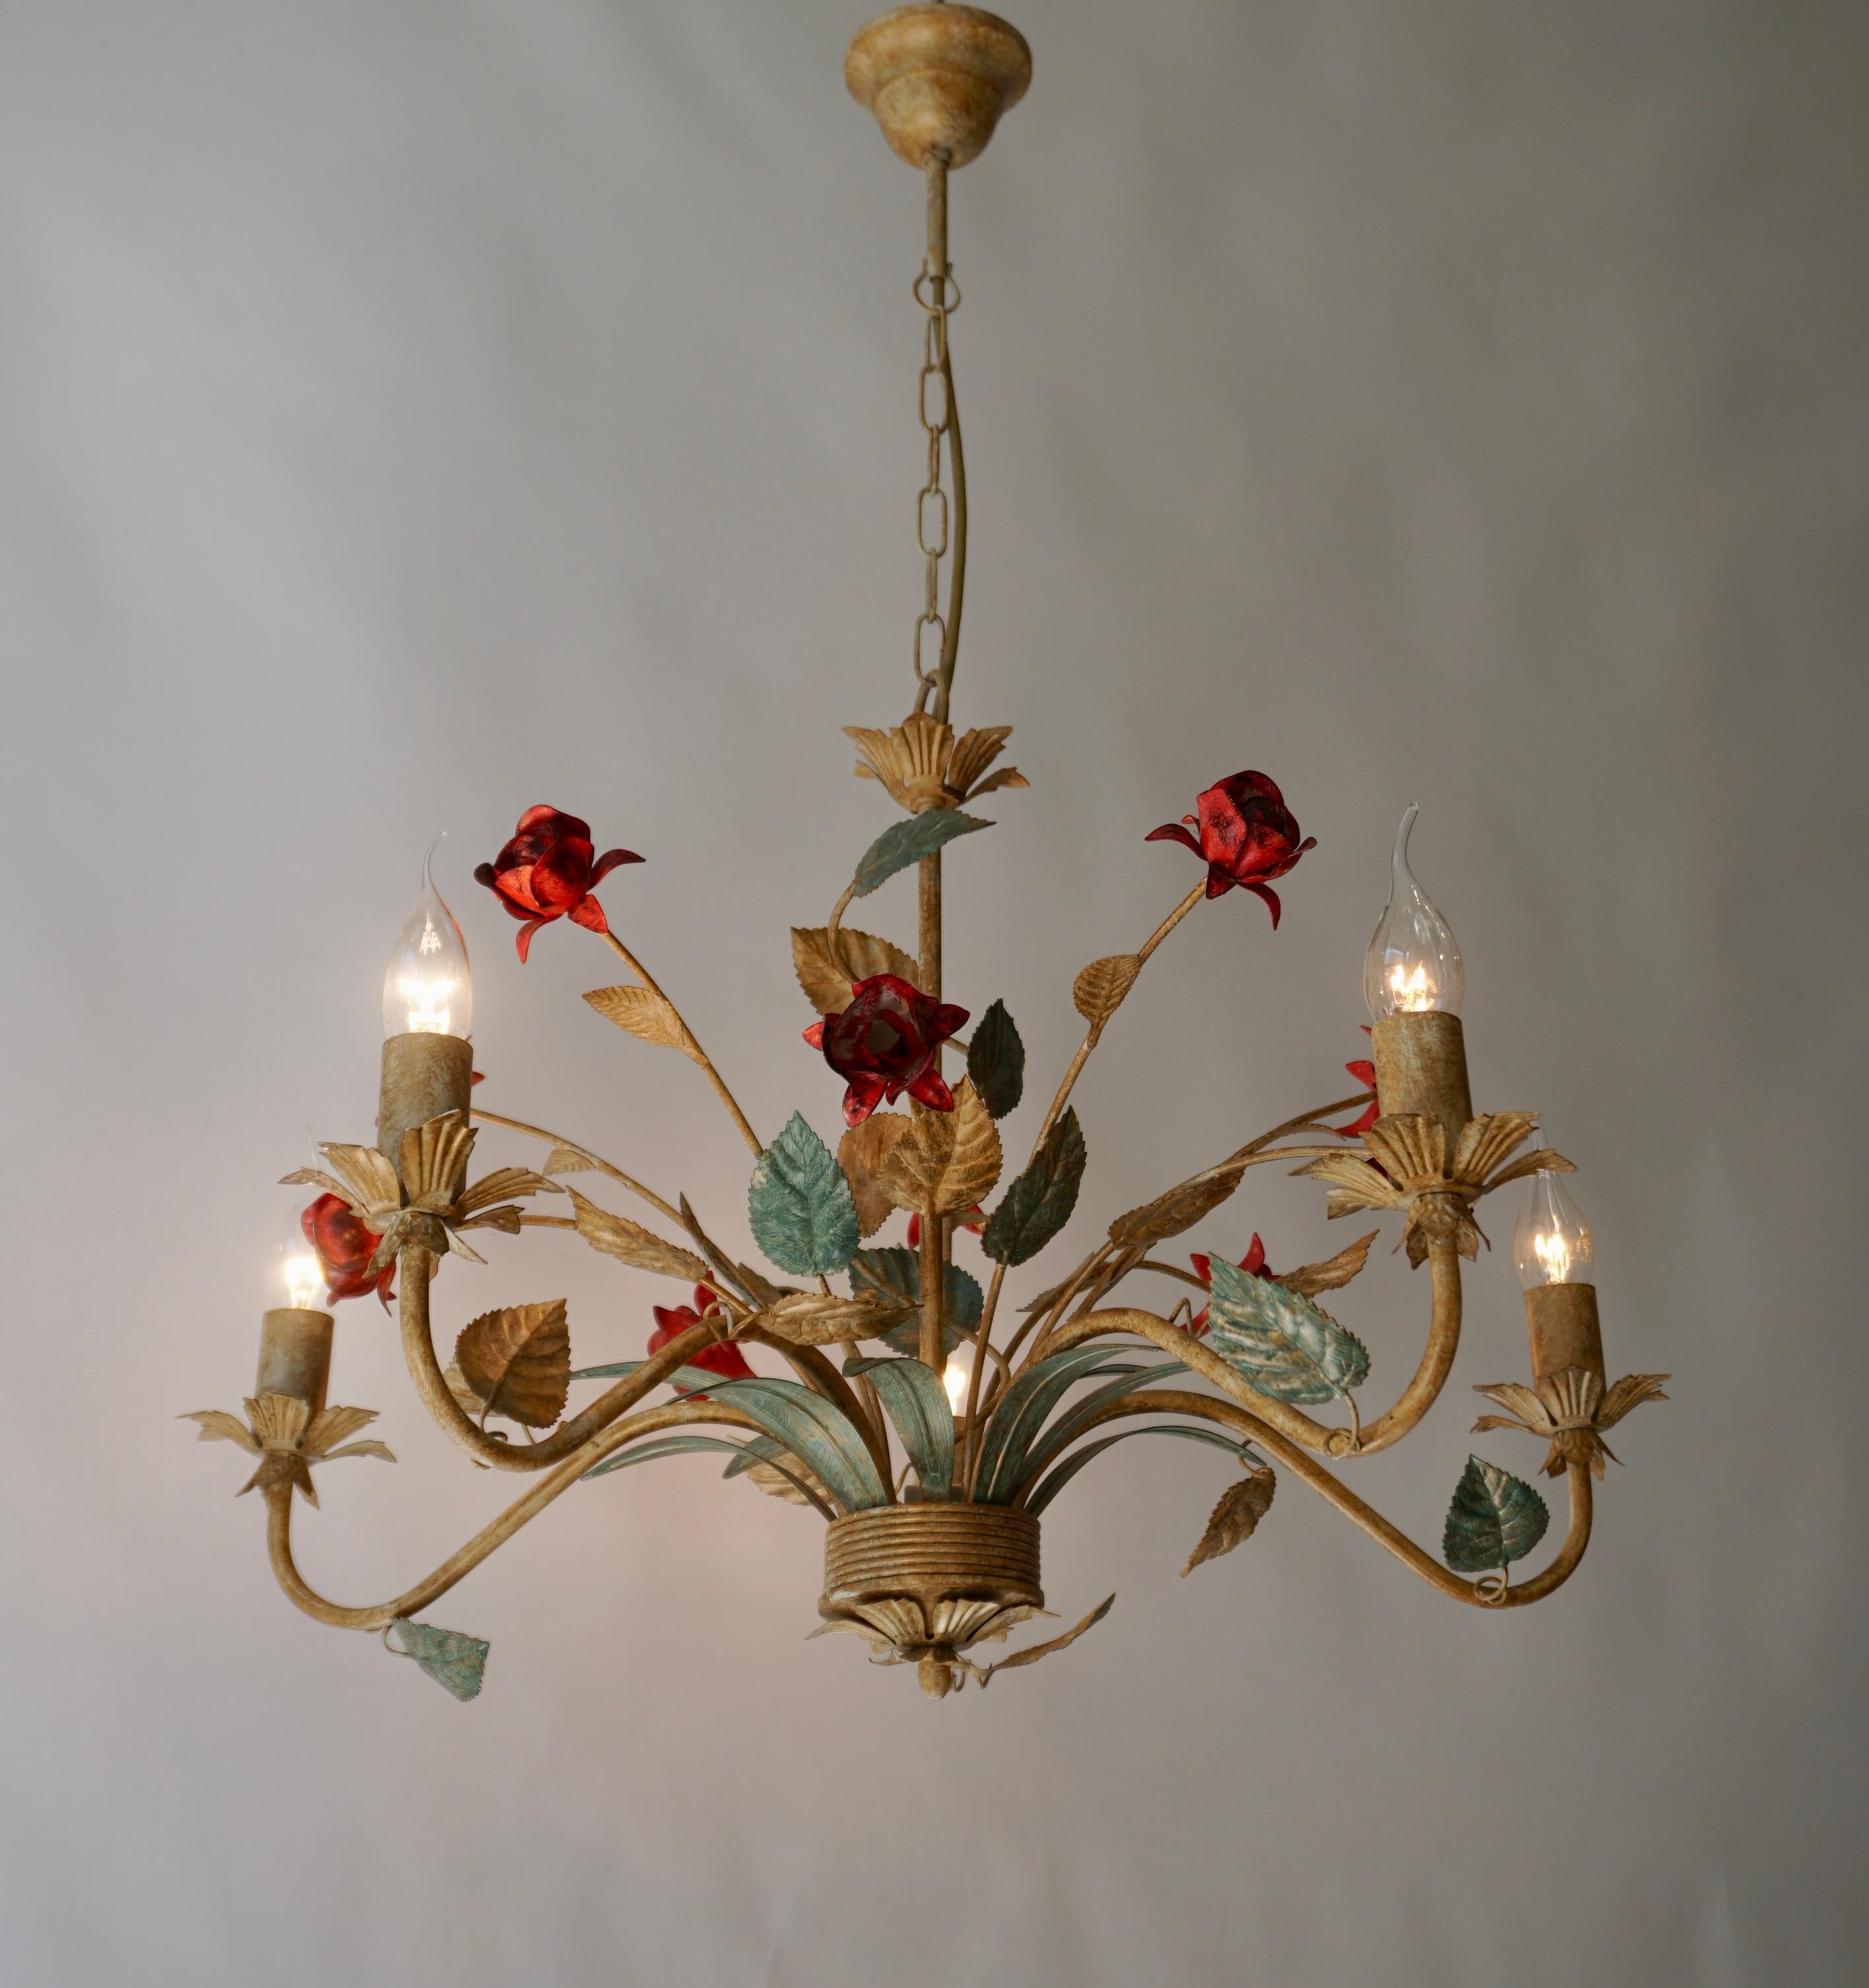 Italian Tole ware painted chandelier with Red Roses 5 Light.

Diameter 25.9